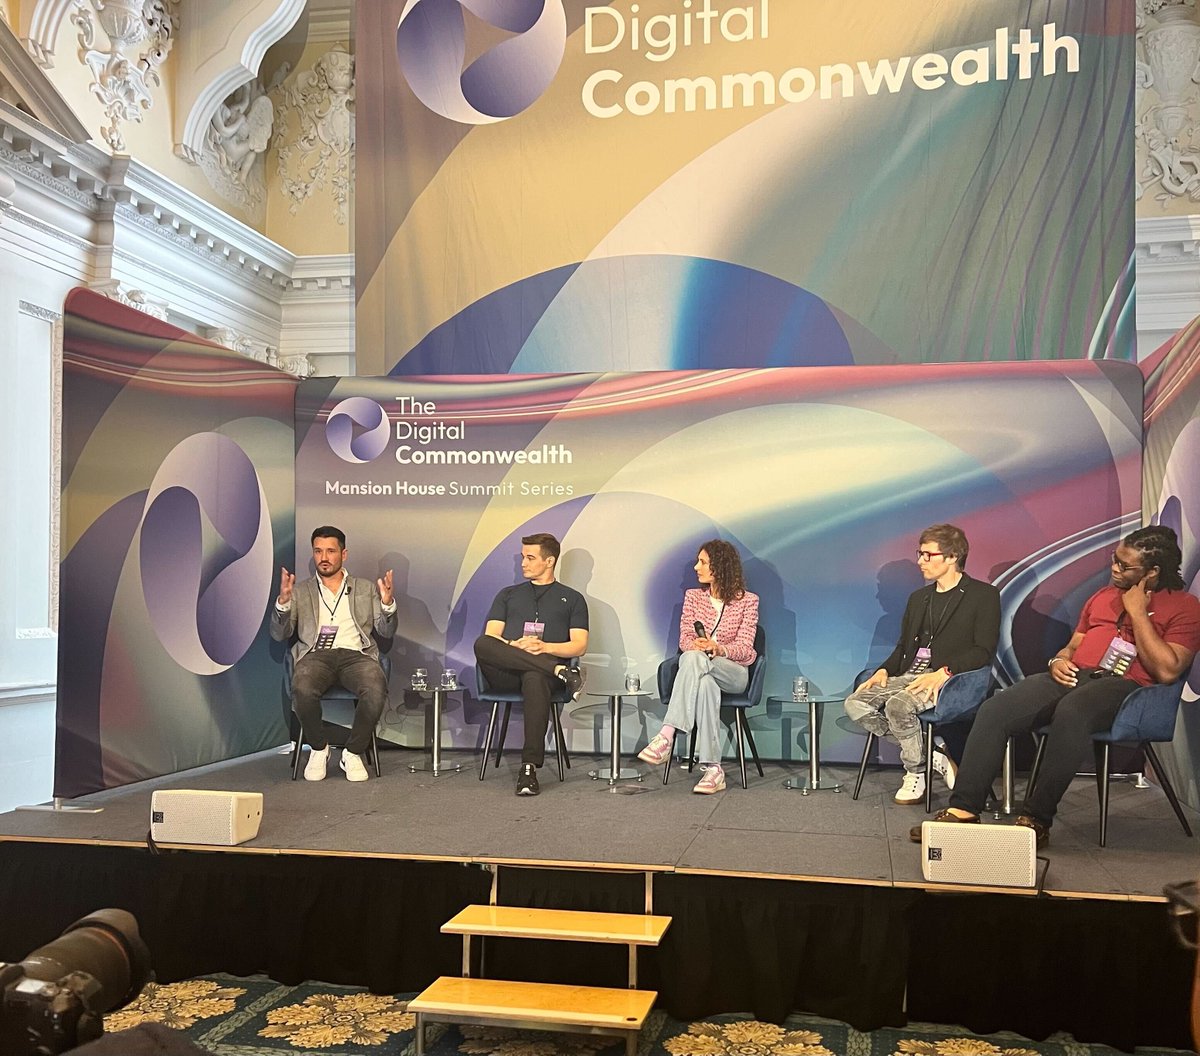 You can spot @CudoPete on the left speaking passionately about #CUDOS at @TheDigitalCom_X's Mansion House Summit Series, exploring #DePIN with the other panelists. If you're attending, be sure to say hey to Pete. 👋 We're always looking to network and form new connections!